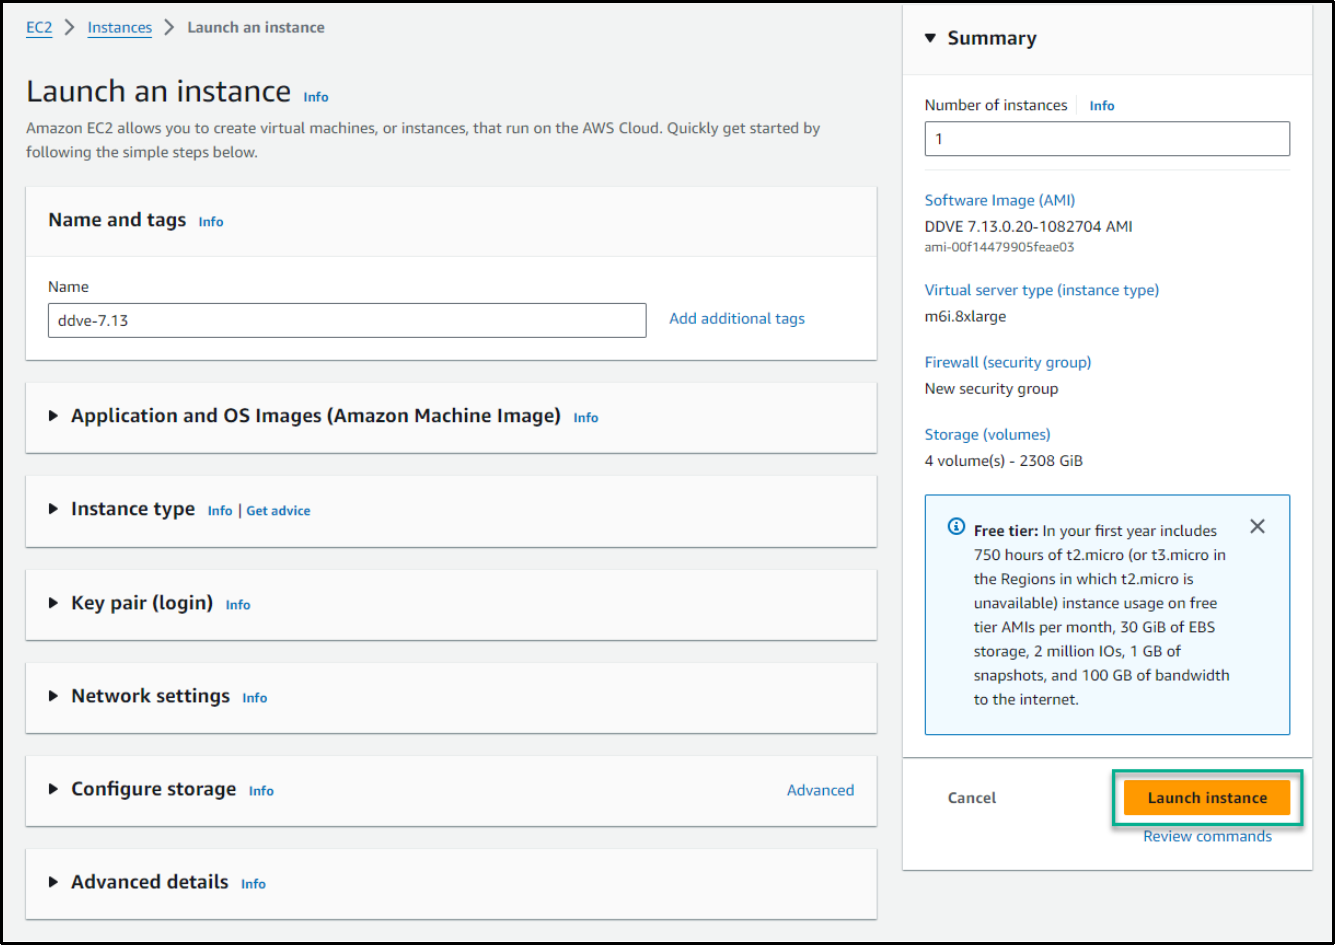 Image showing option to review the configuration details and to launch the instance.